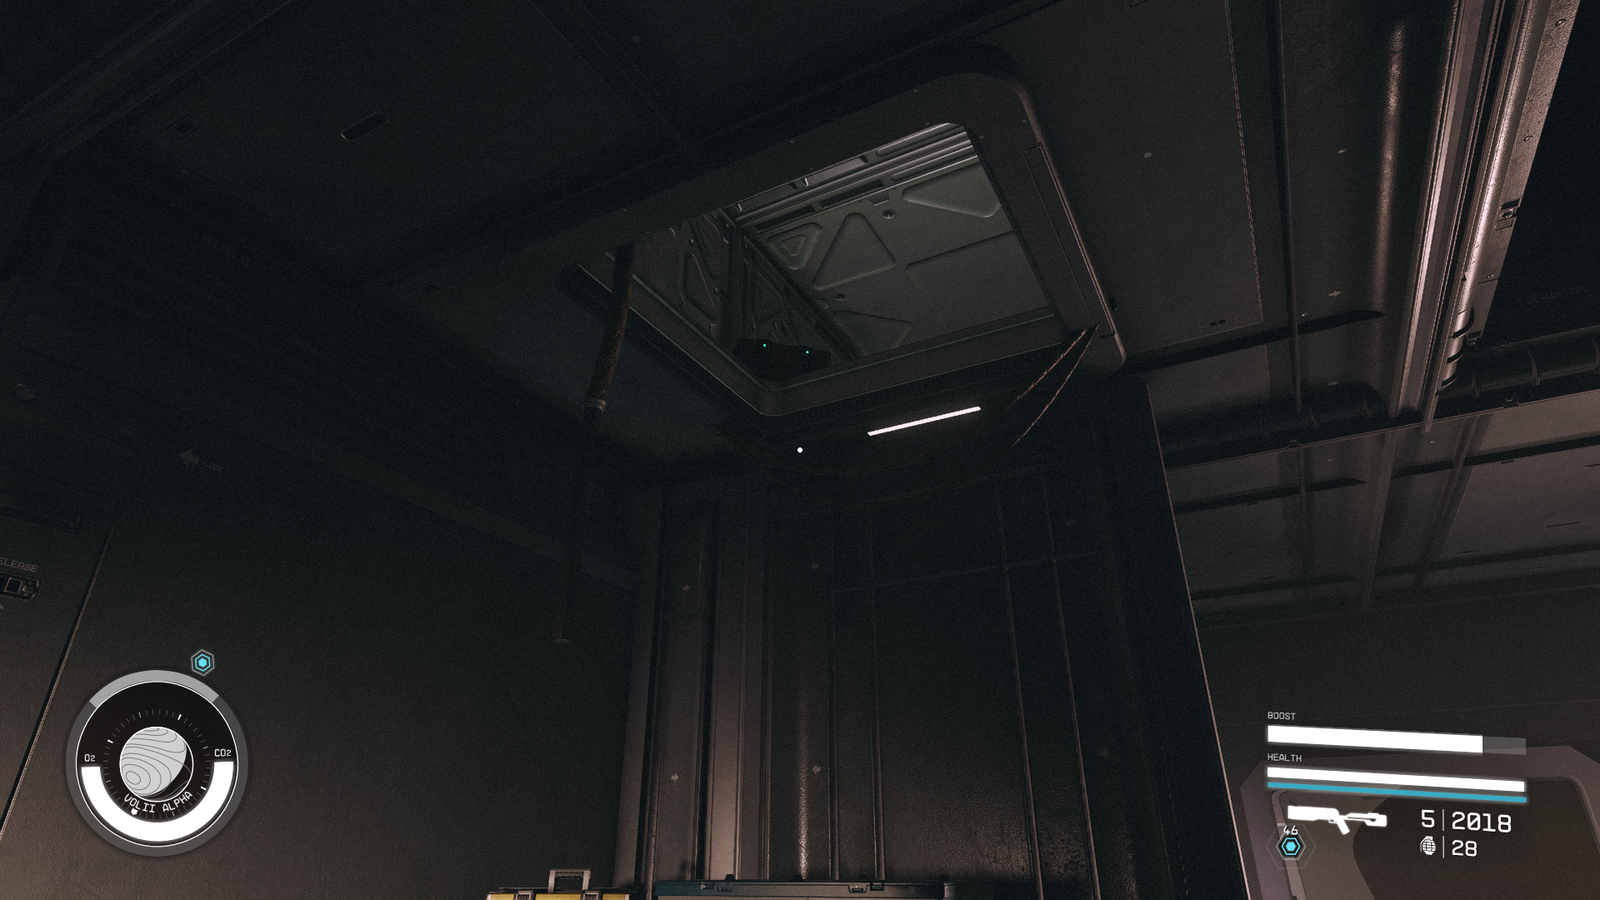 starfield background checks ryujin tower vent on ceiling